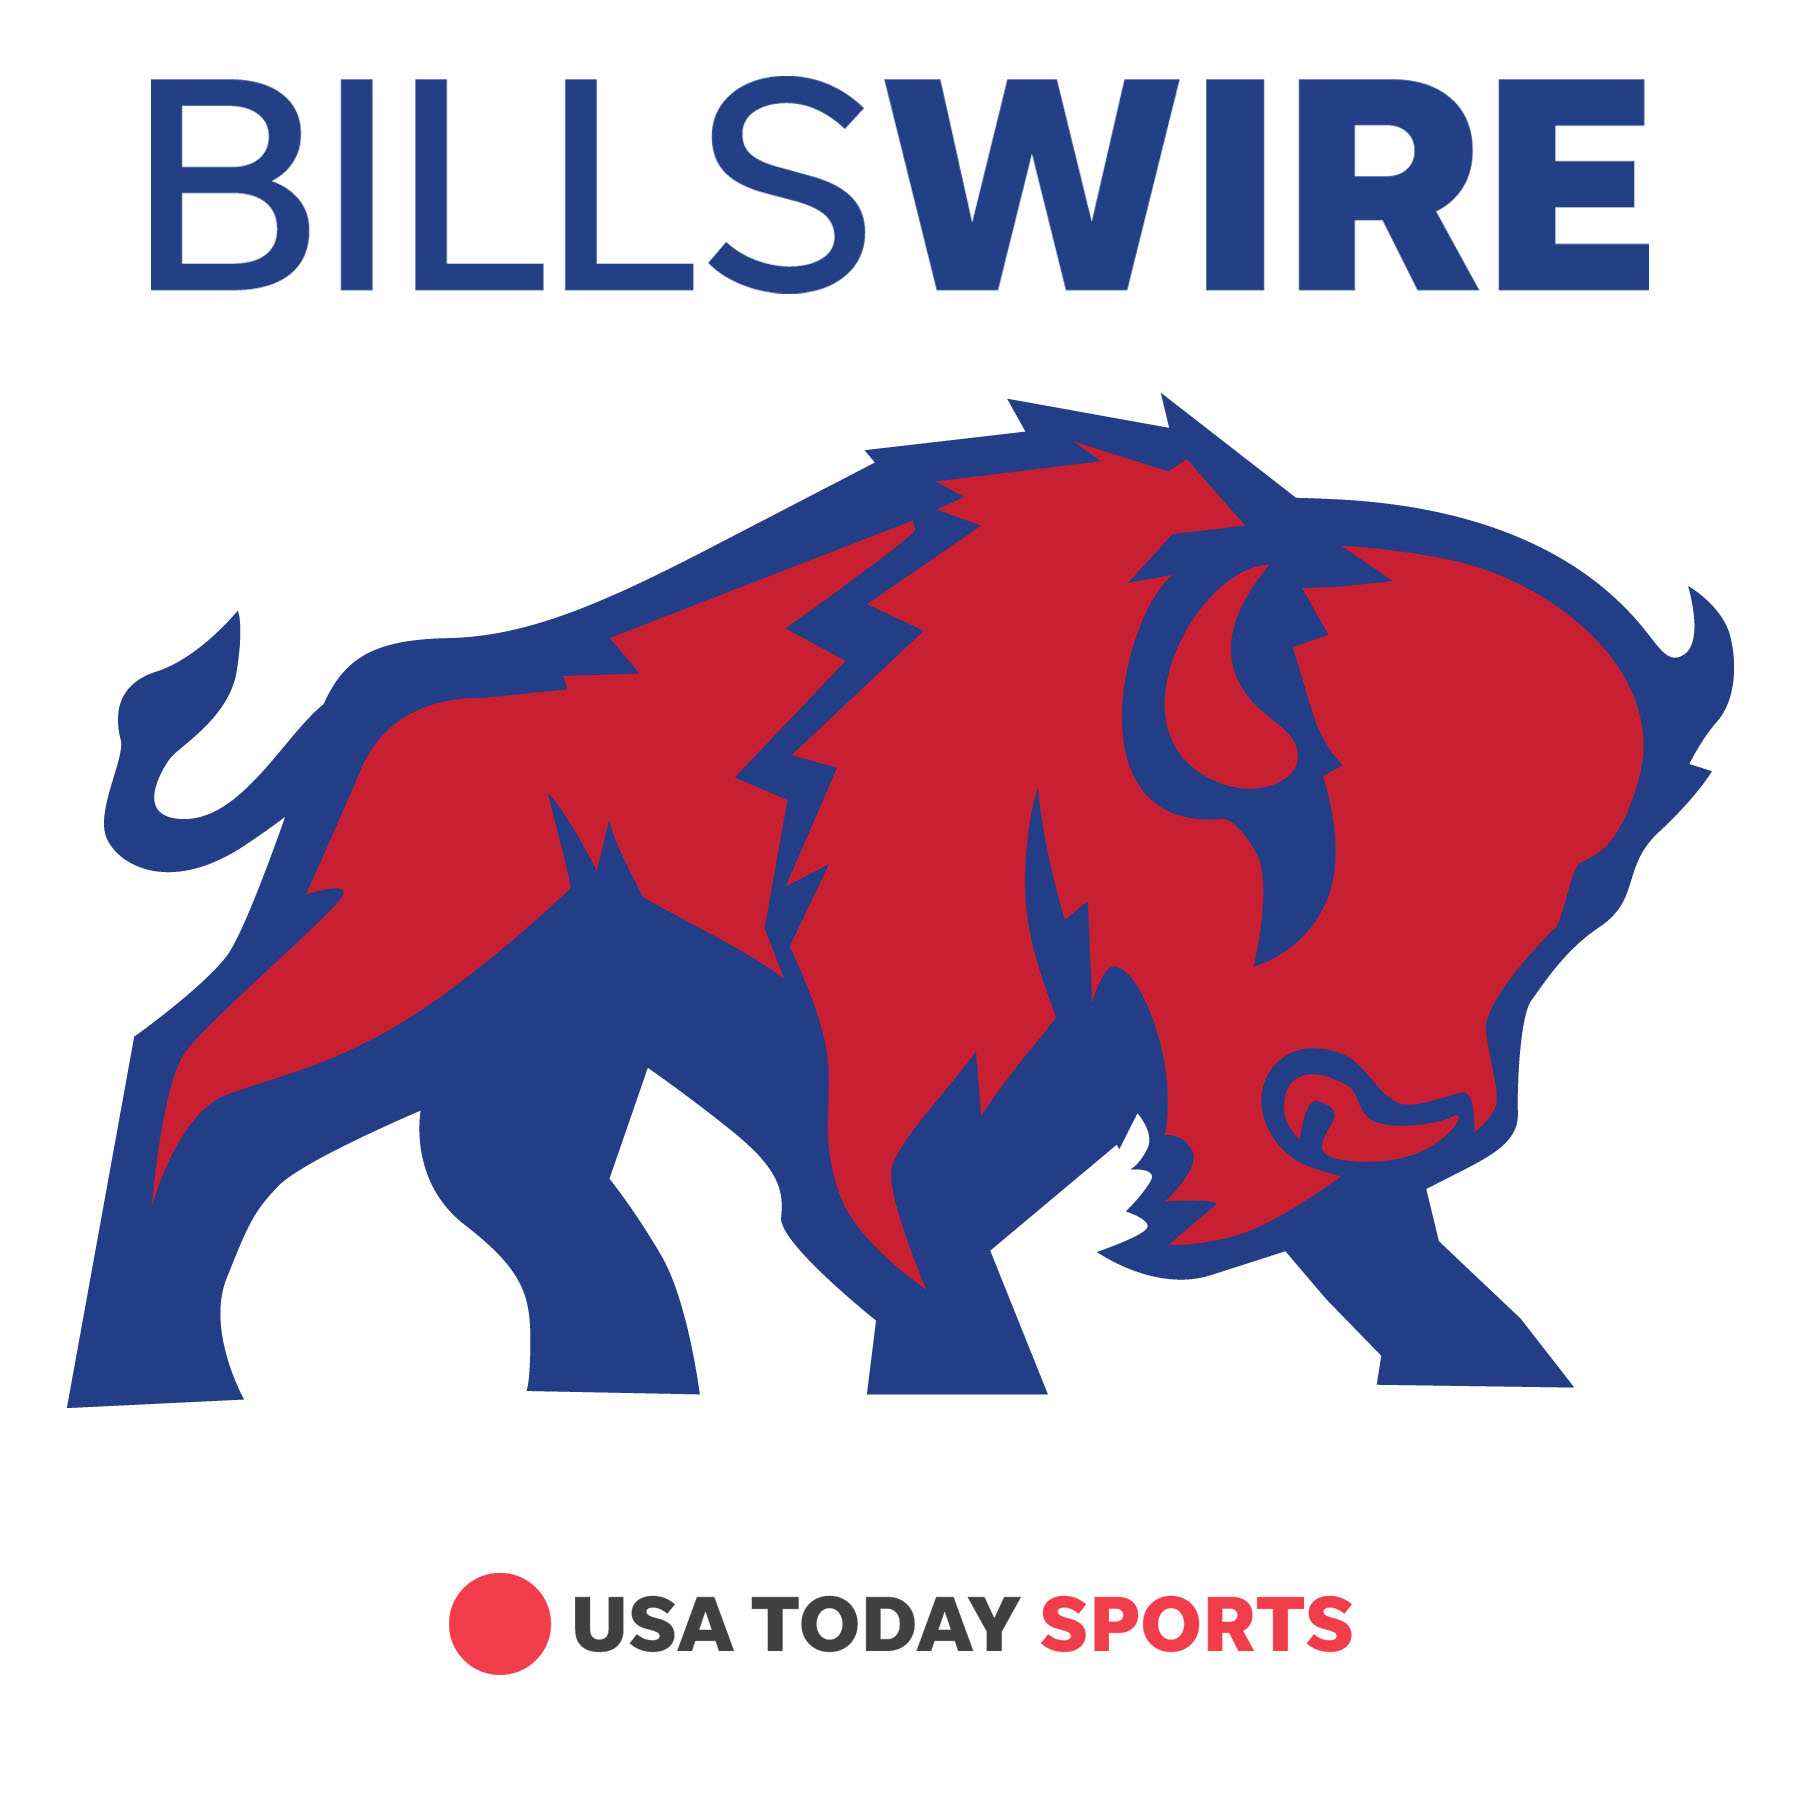 Buffalo’s new ‘everything in moderation’ approach // Josh Allen’s discipline // Bills-Commanders preview with predictions